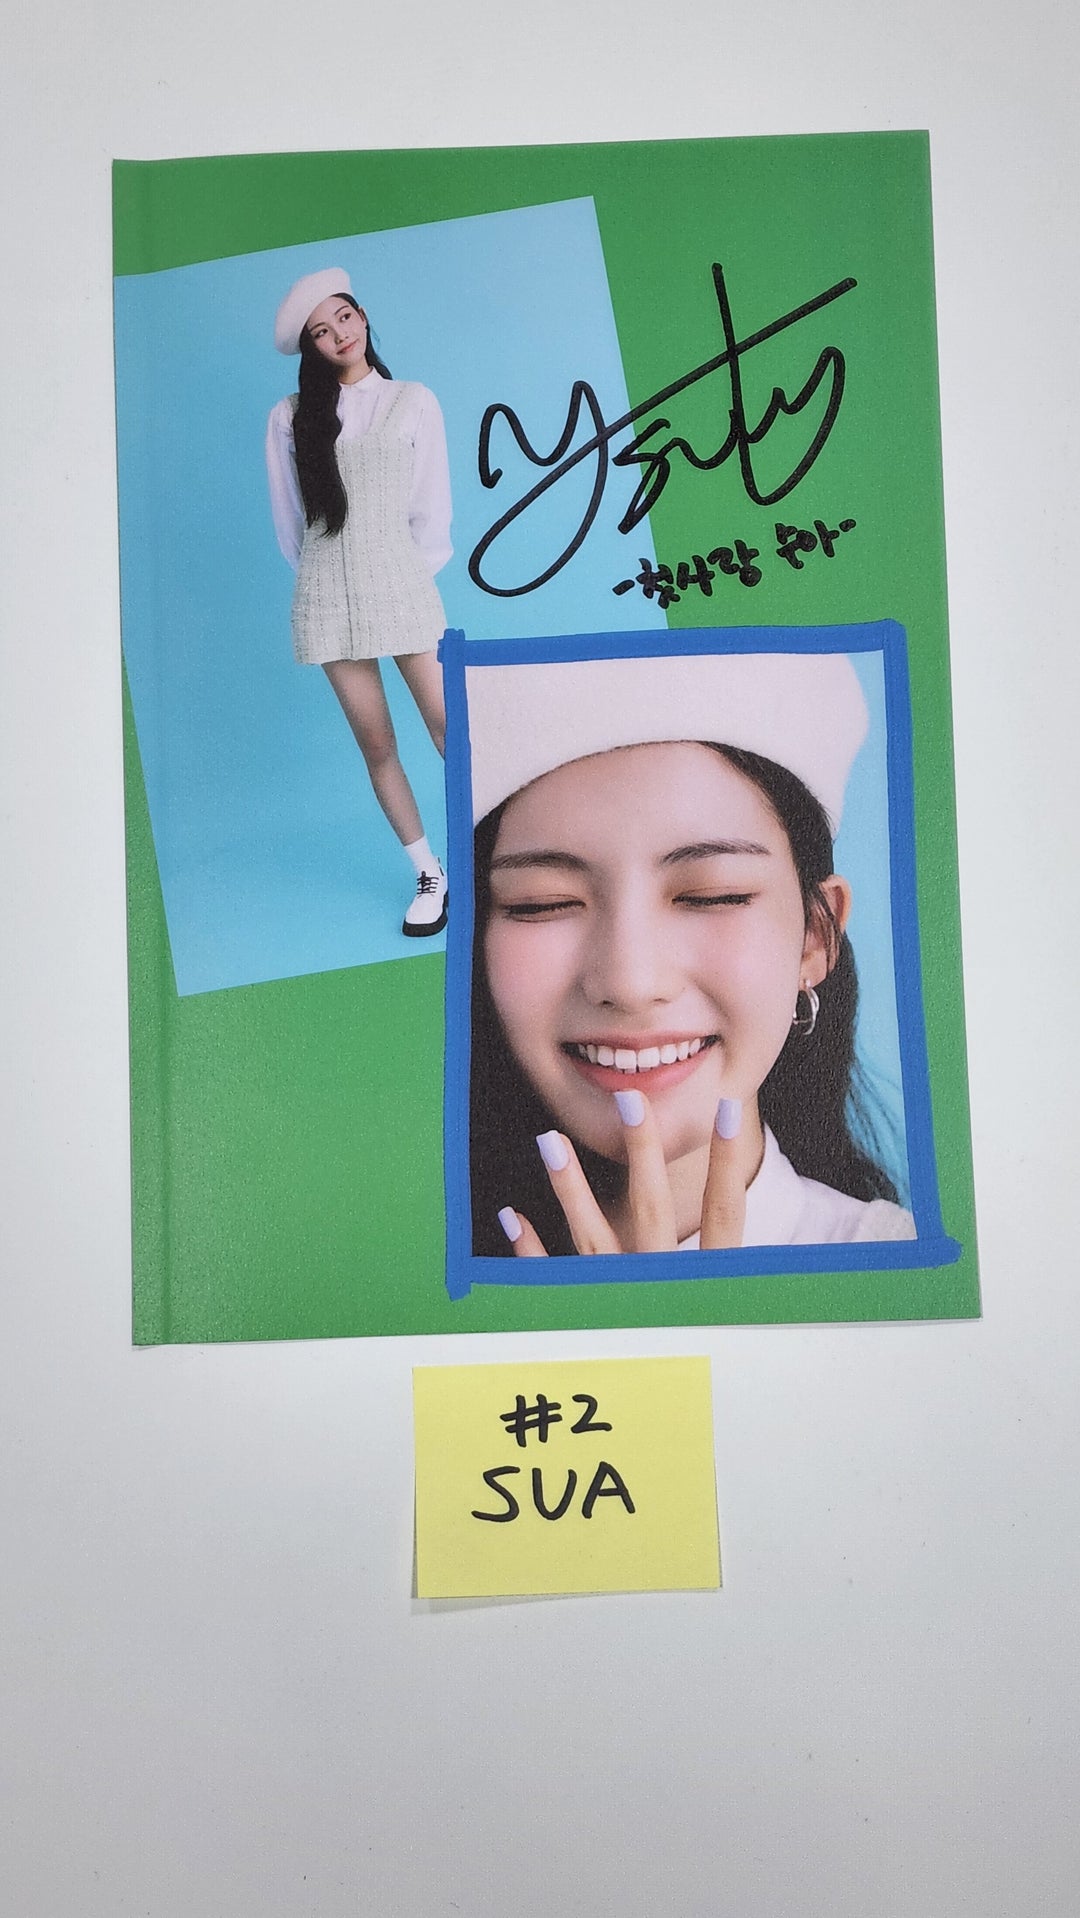 CSR "Sequencce : 7272" - A Cut Page From Fansign Event Album